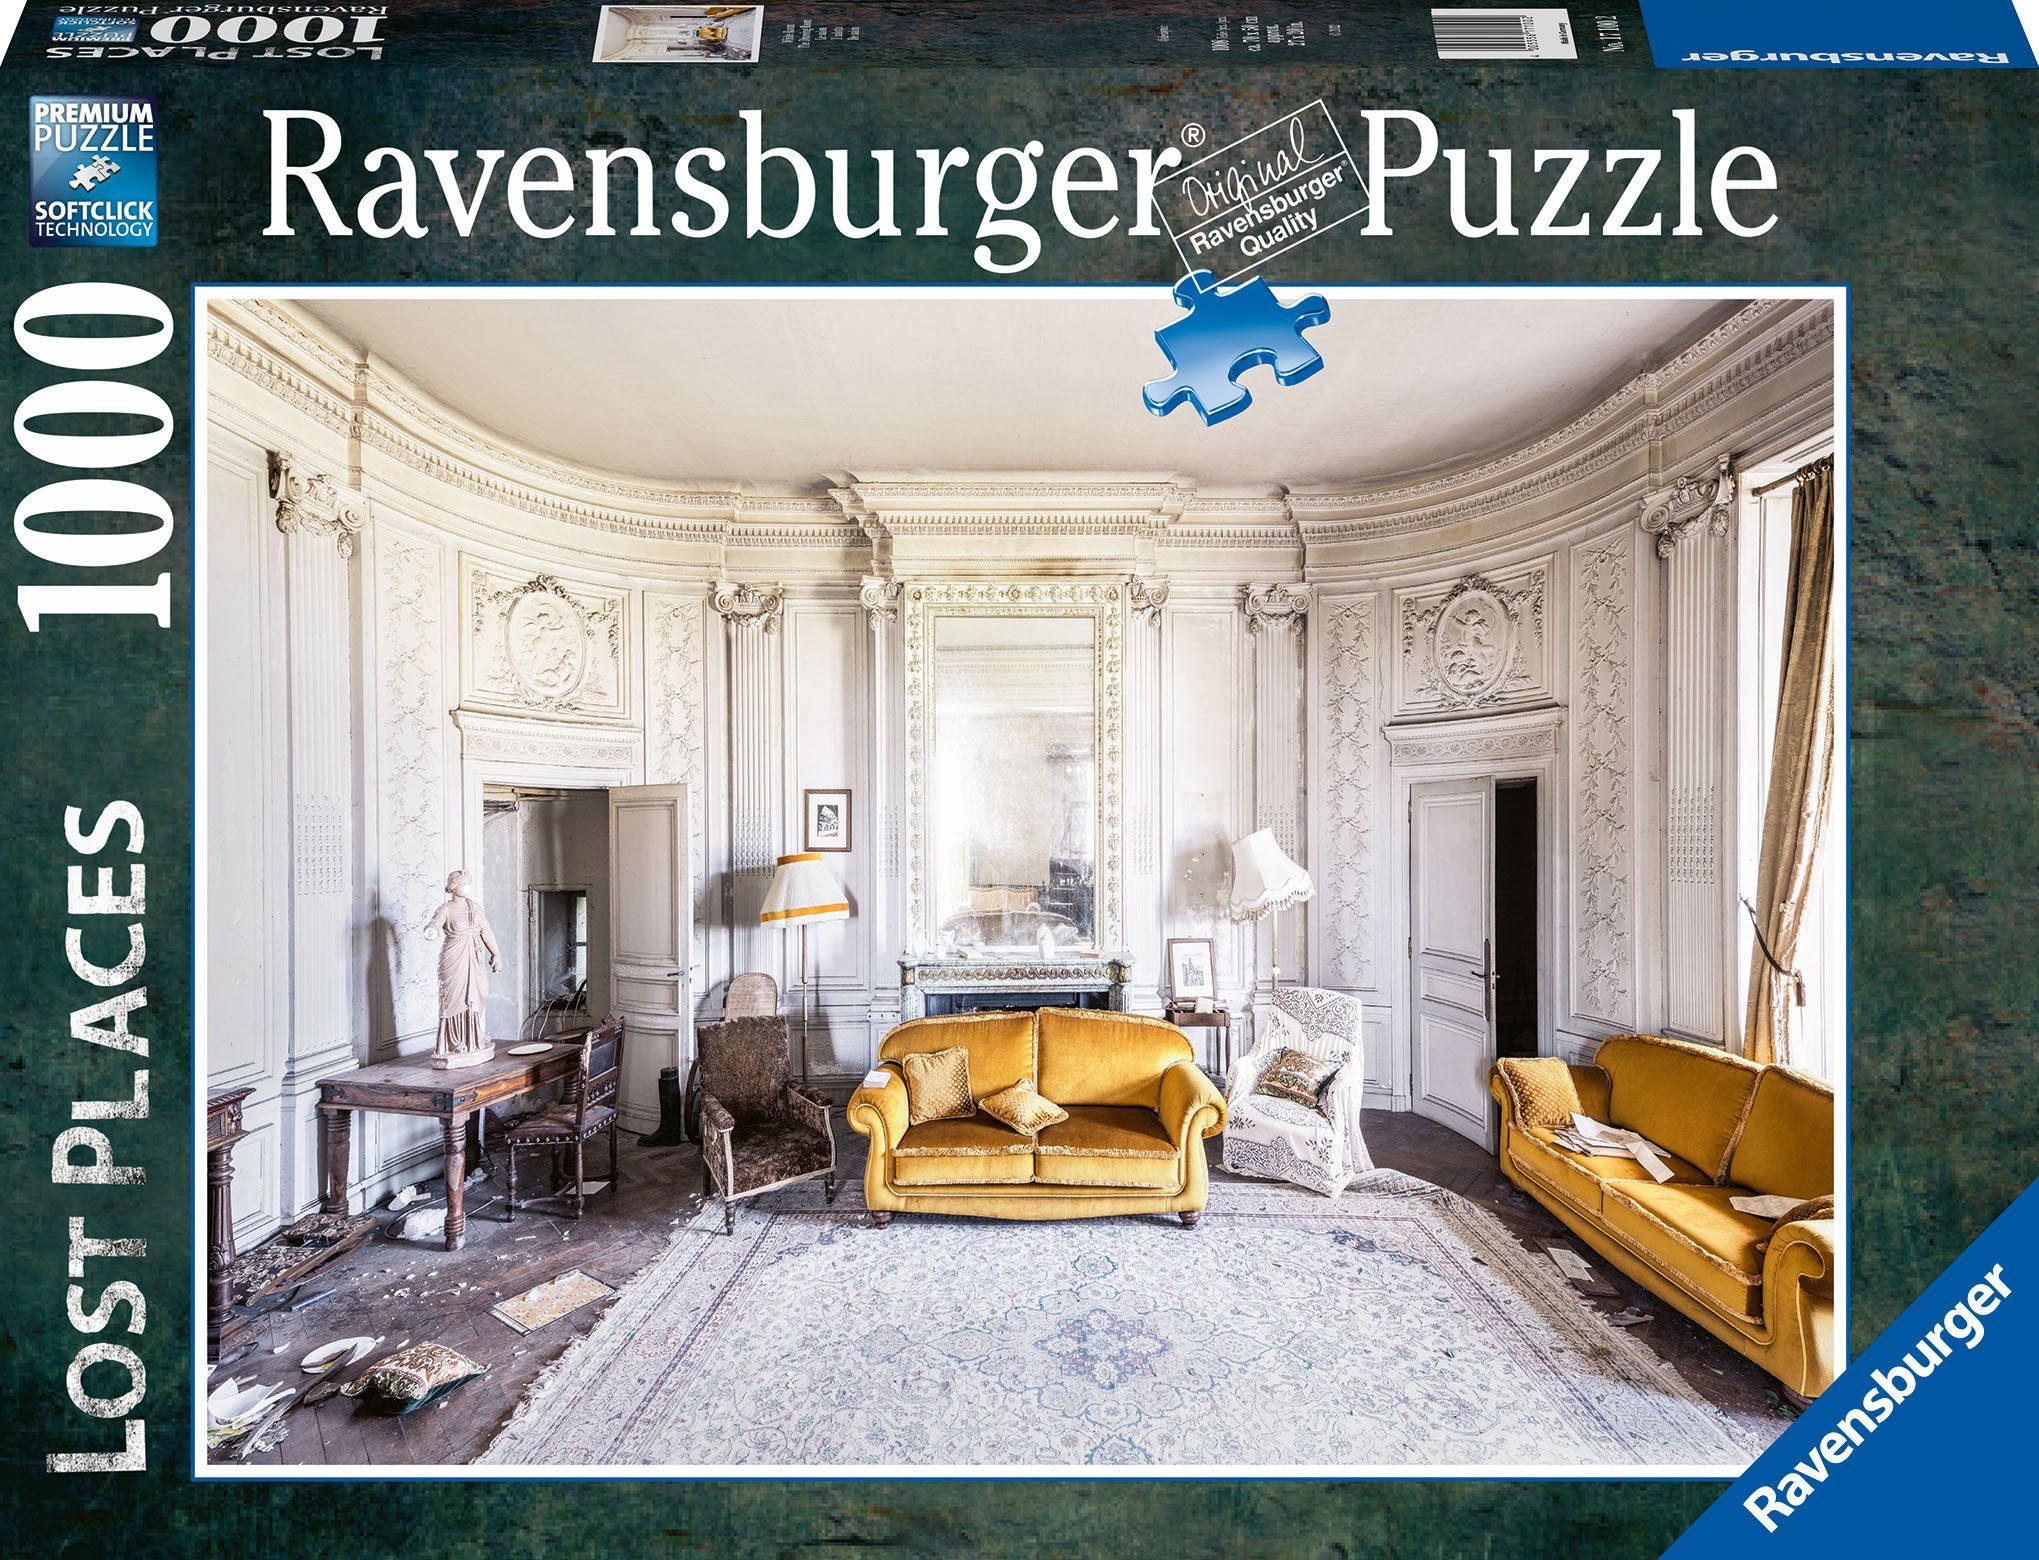 Ravensburger Puzzle Lost Places, White Room, 1000 Puzzleteile, Made in Germany, FSC® - schützt Wald - weltweit | Puzzle